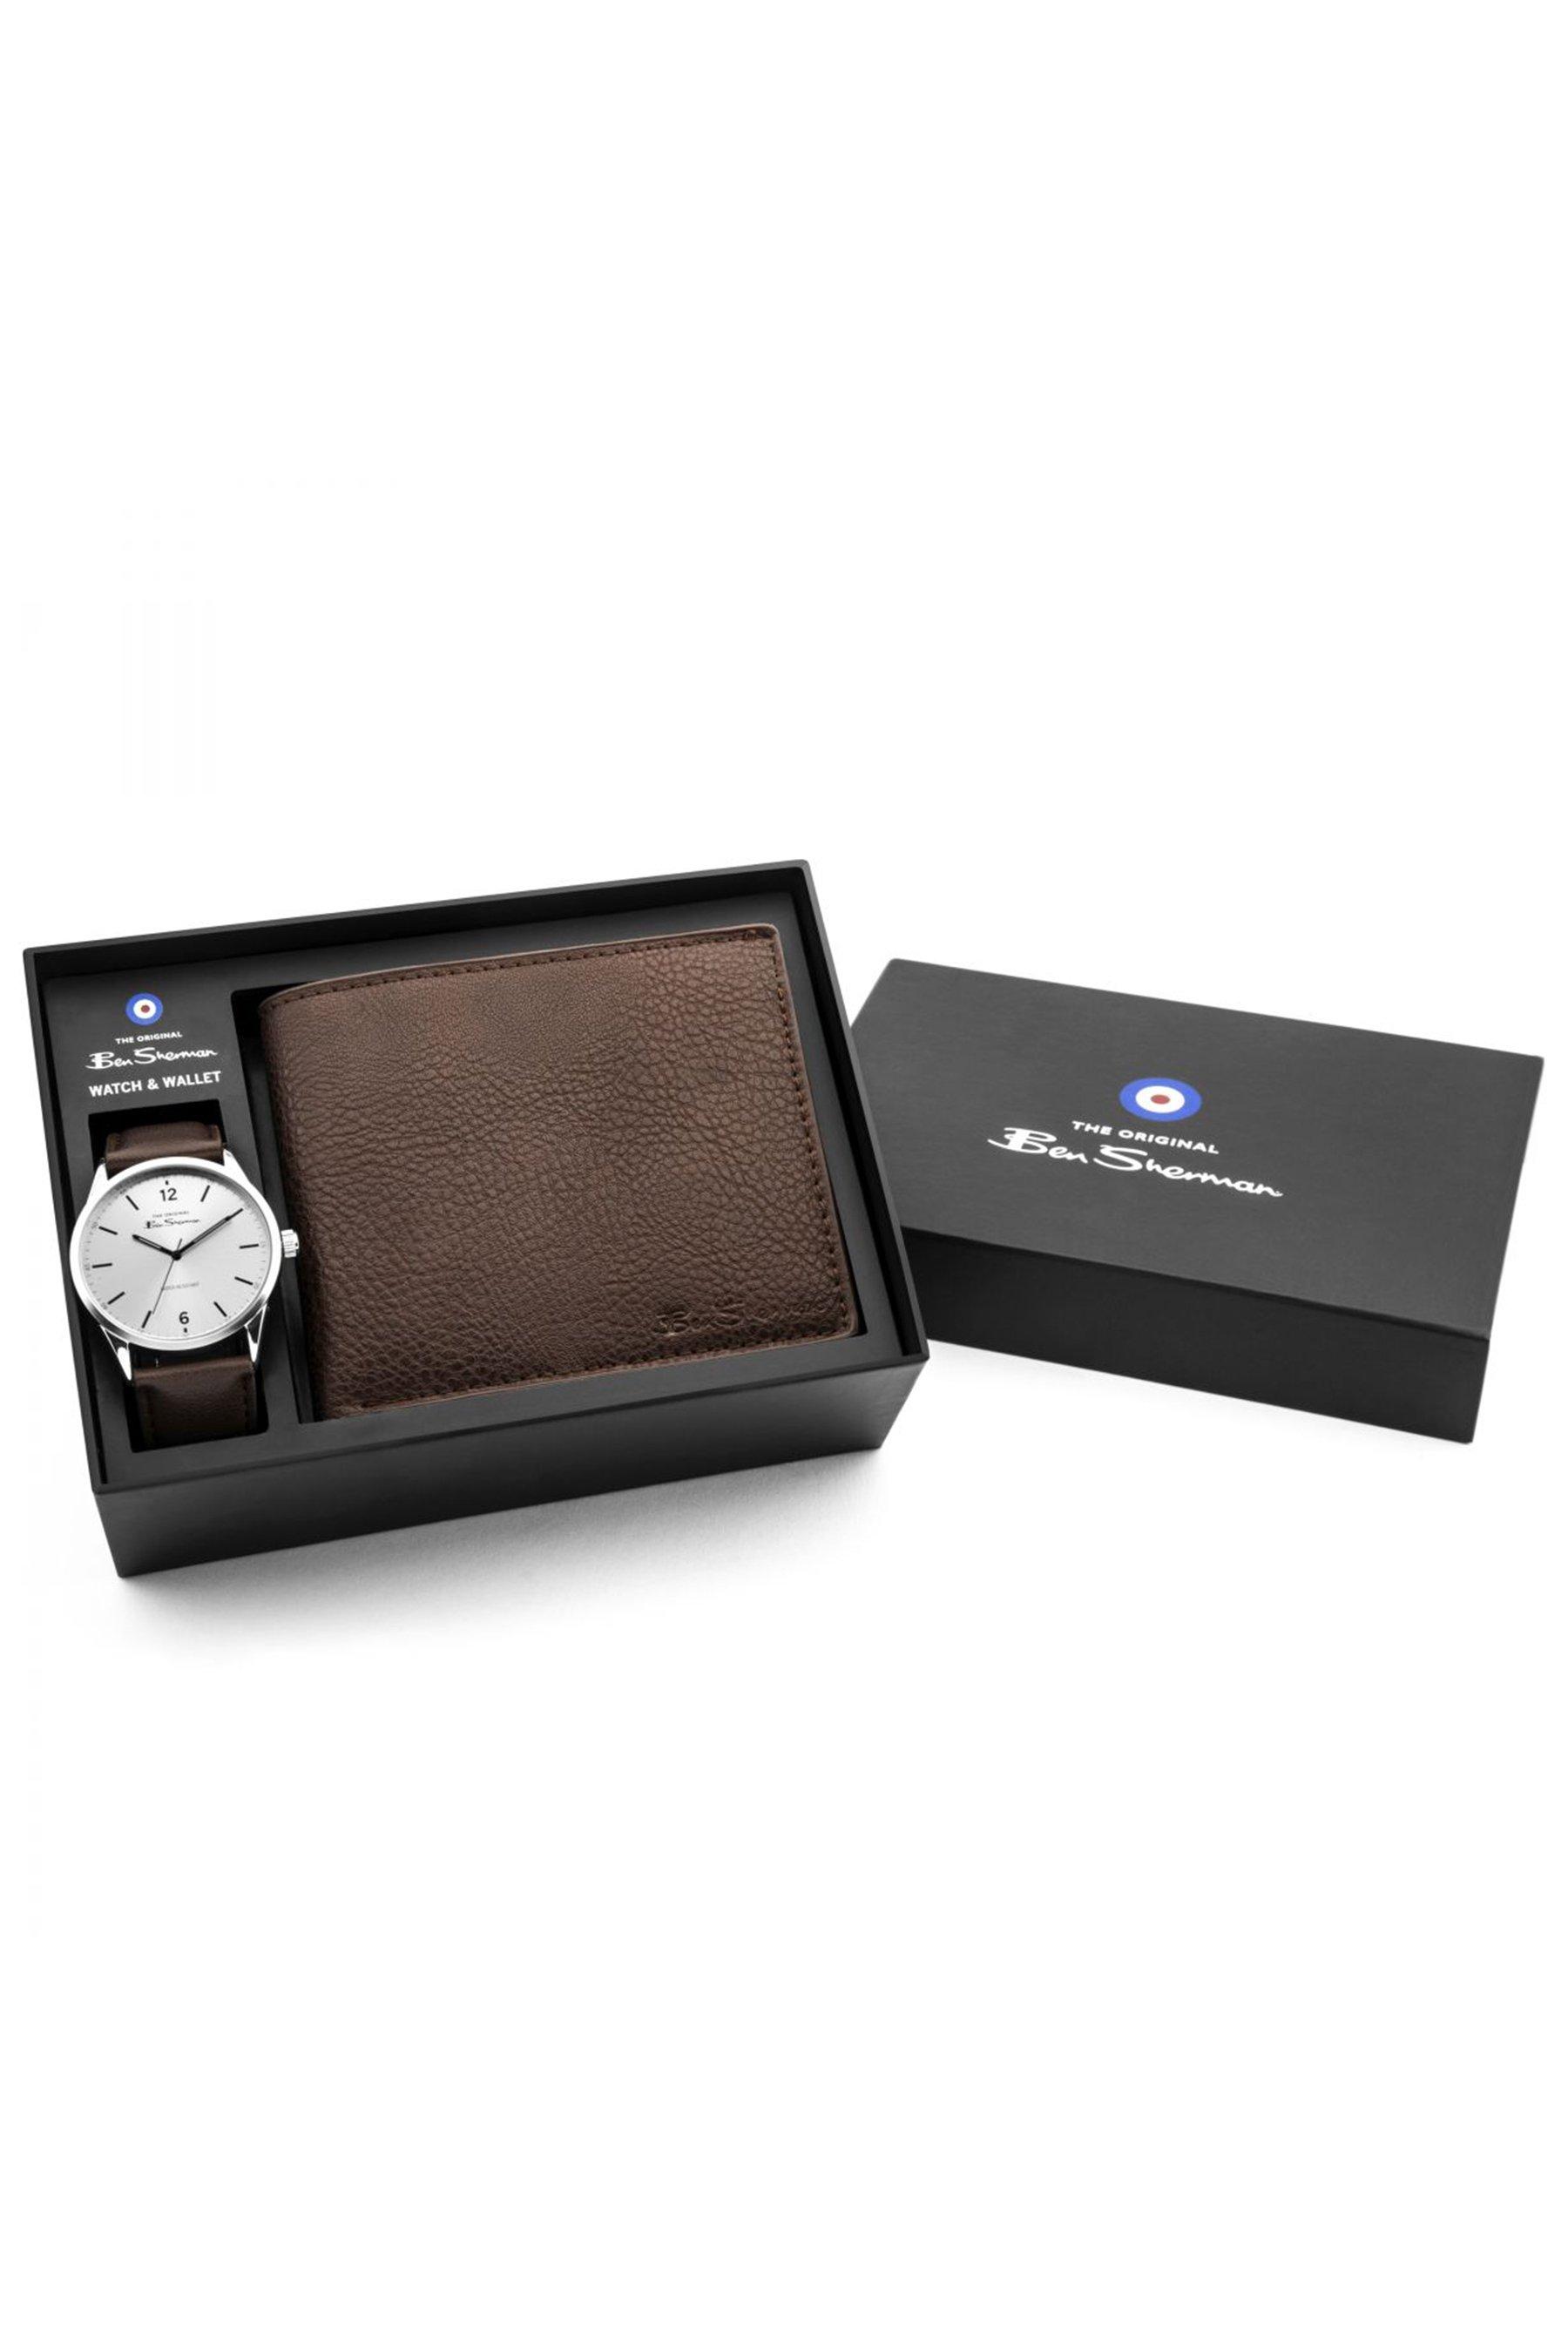 ben sherman brown strap watch and wallet gift set - size: one size - stainless steel - mens